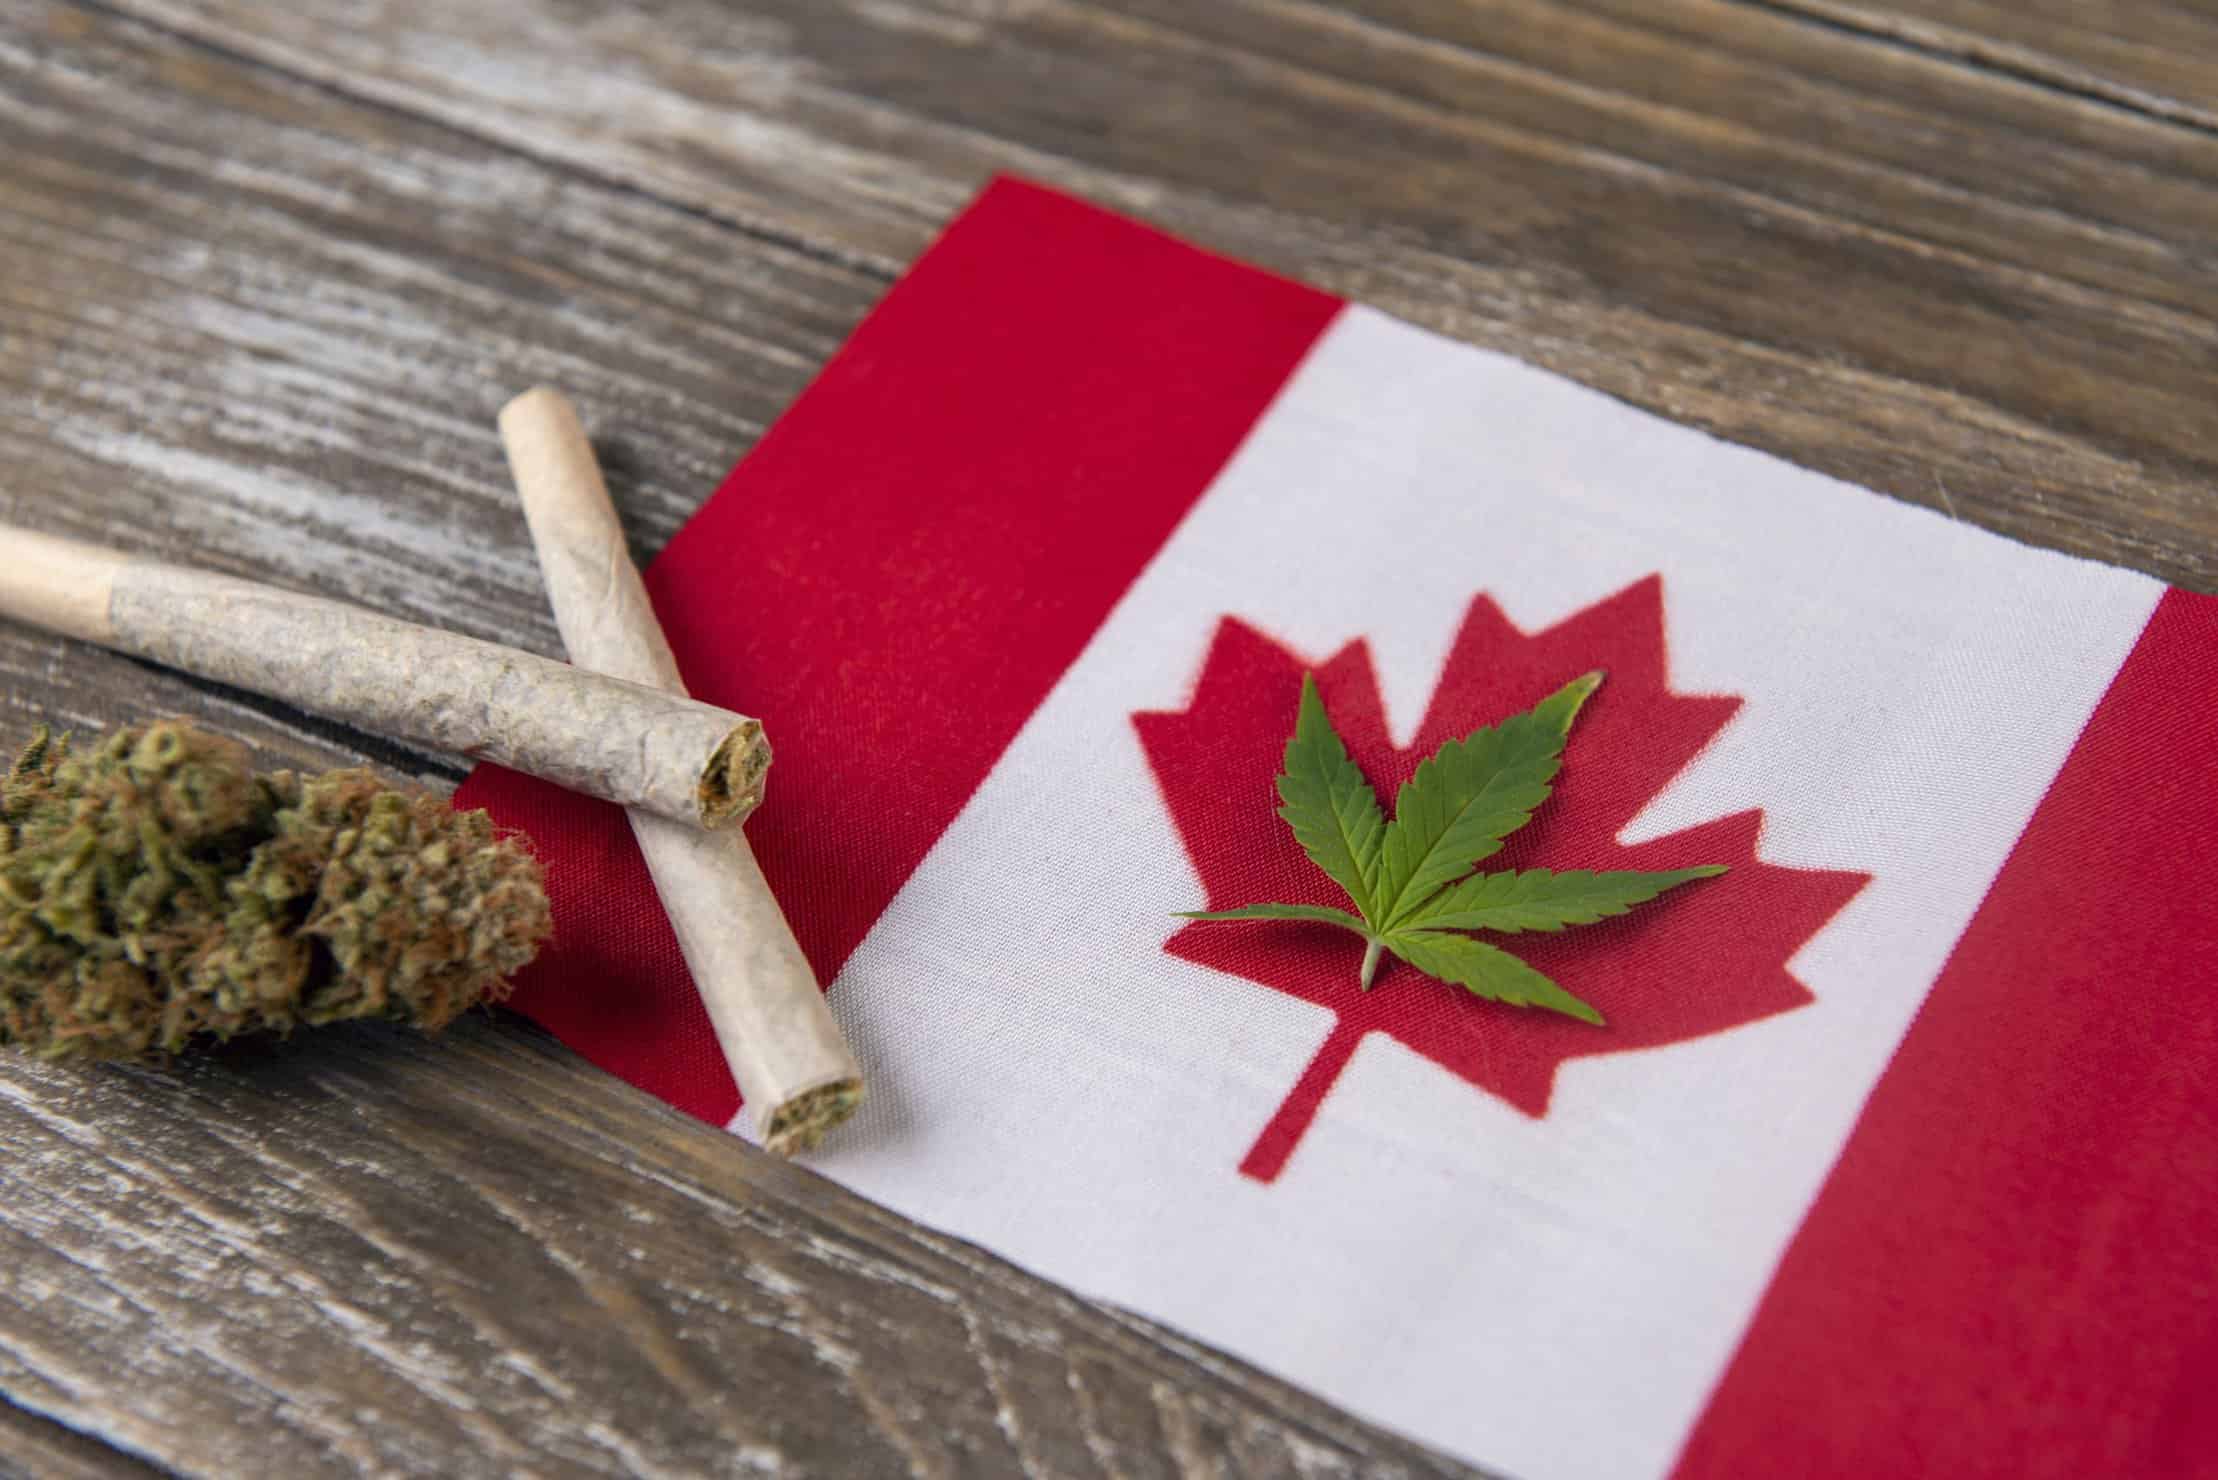 2019 Marijuana Trends In Canada That You Should Watch For